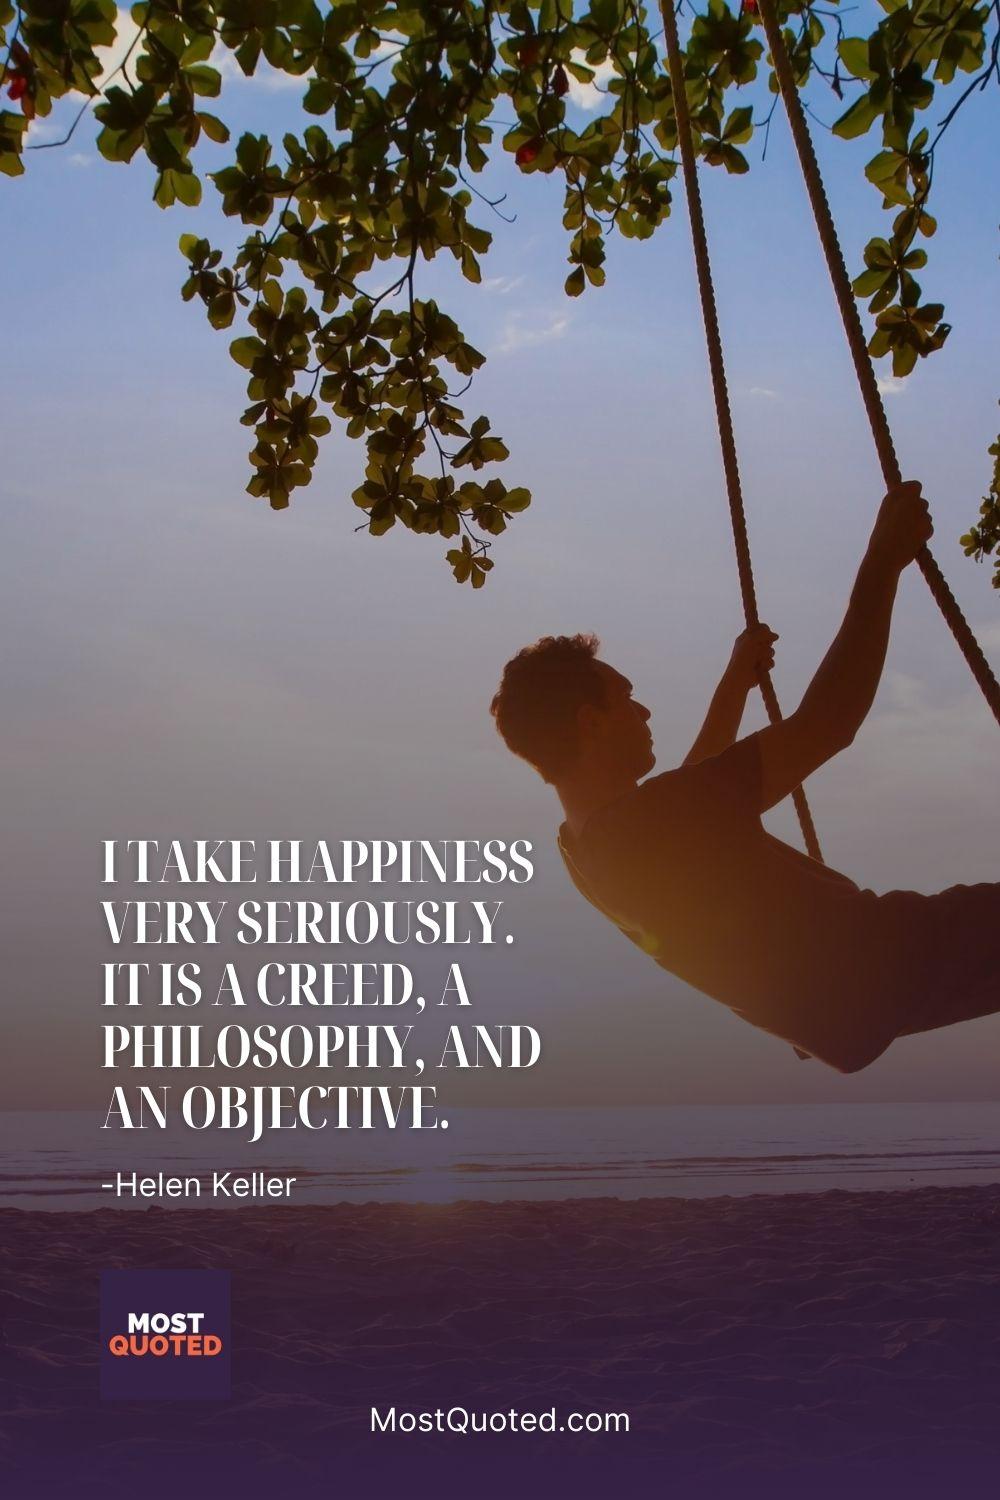 I take happiness very seriously. It is a creed, a philosophy, and an objective. - Helen Keller